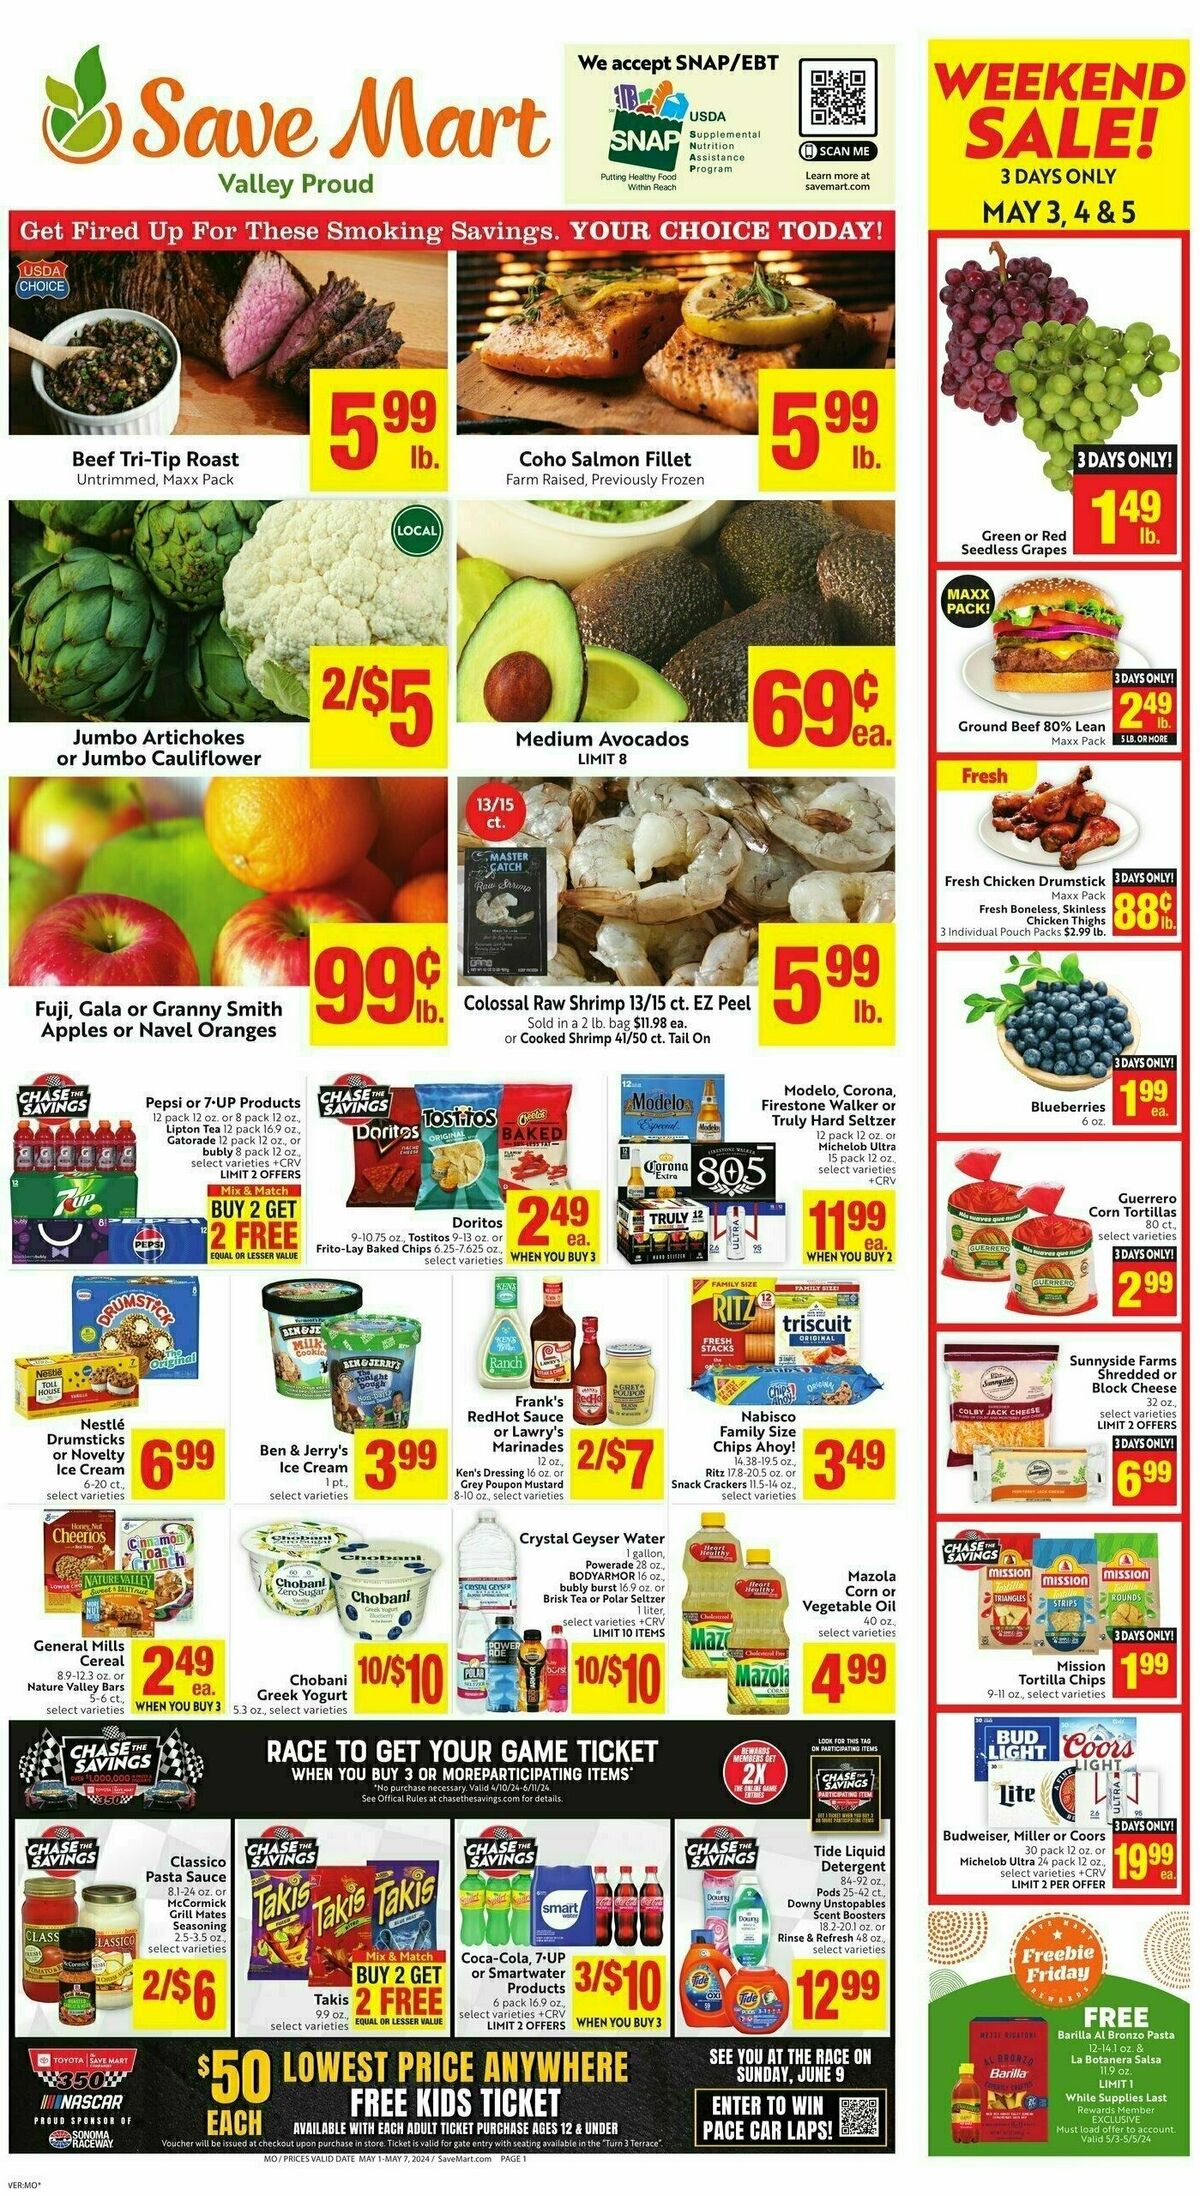 Save Mart Weekly Ad from May 1